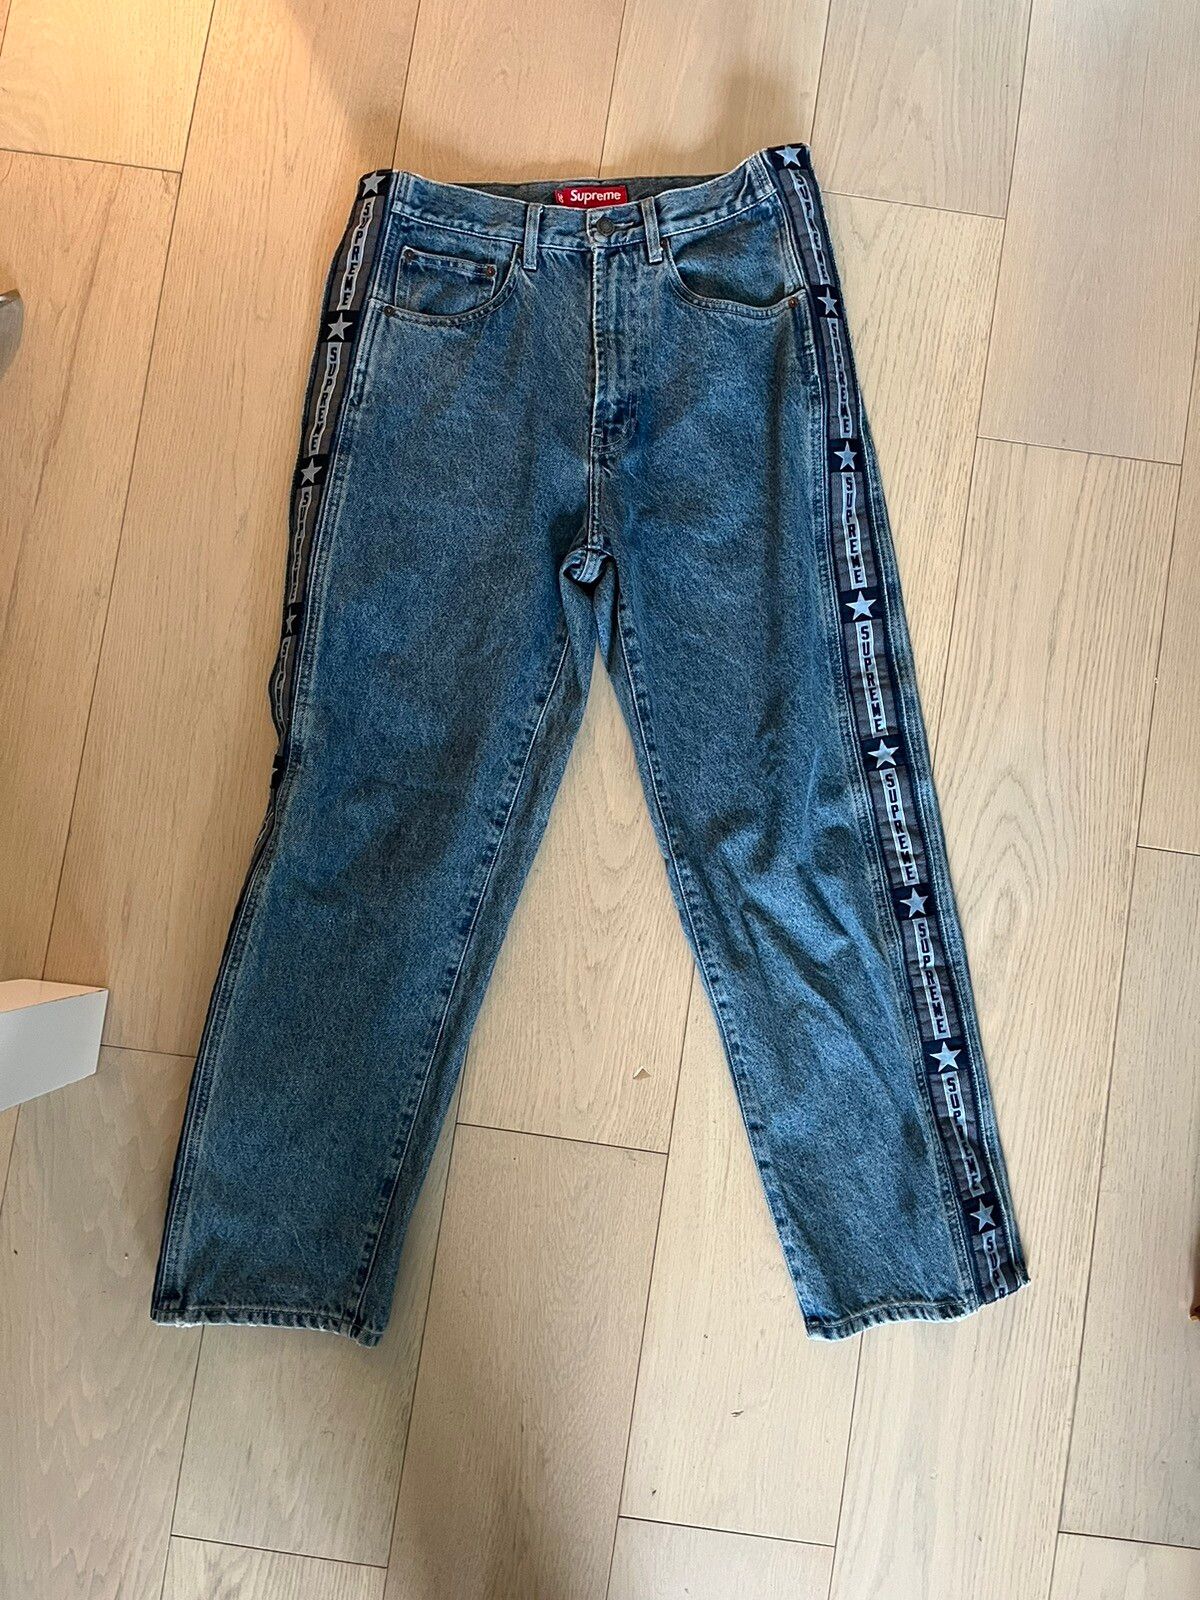 Supreme Supreme baggy snap off star jeans | Grailed